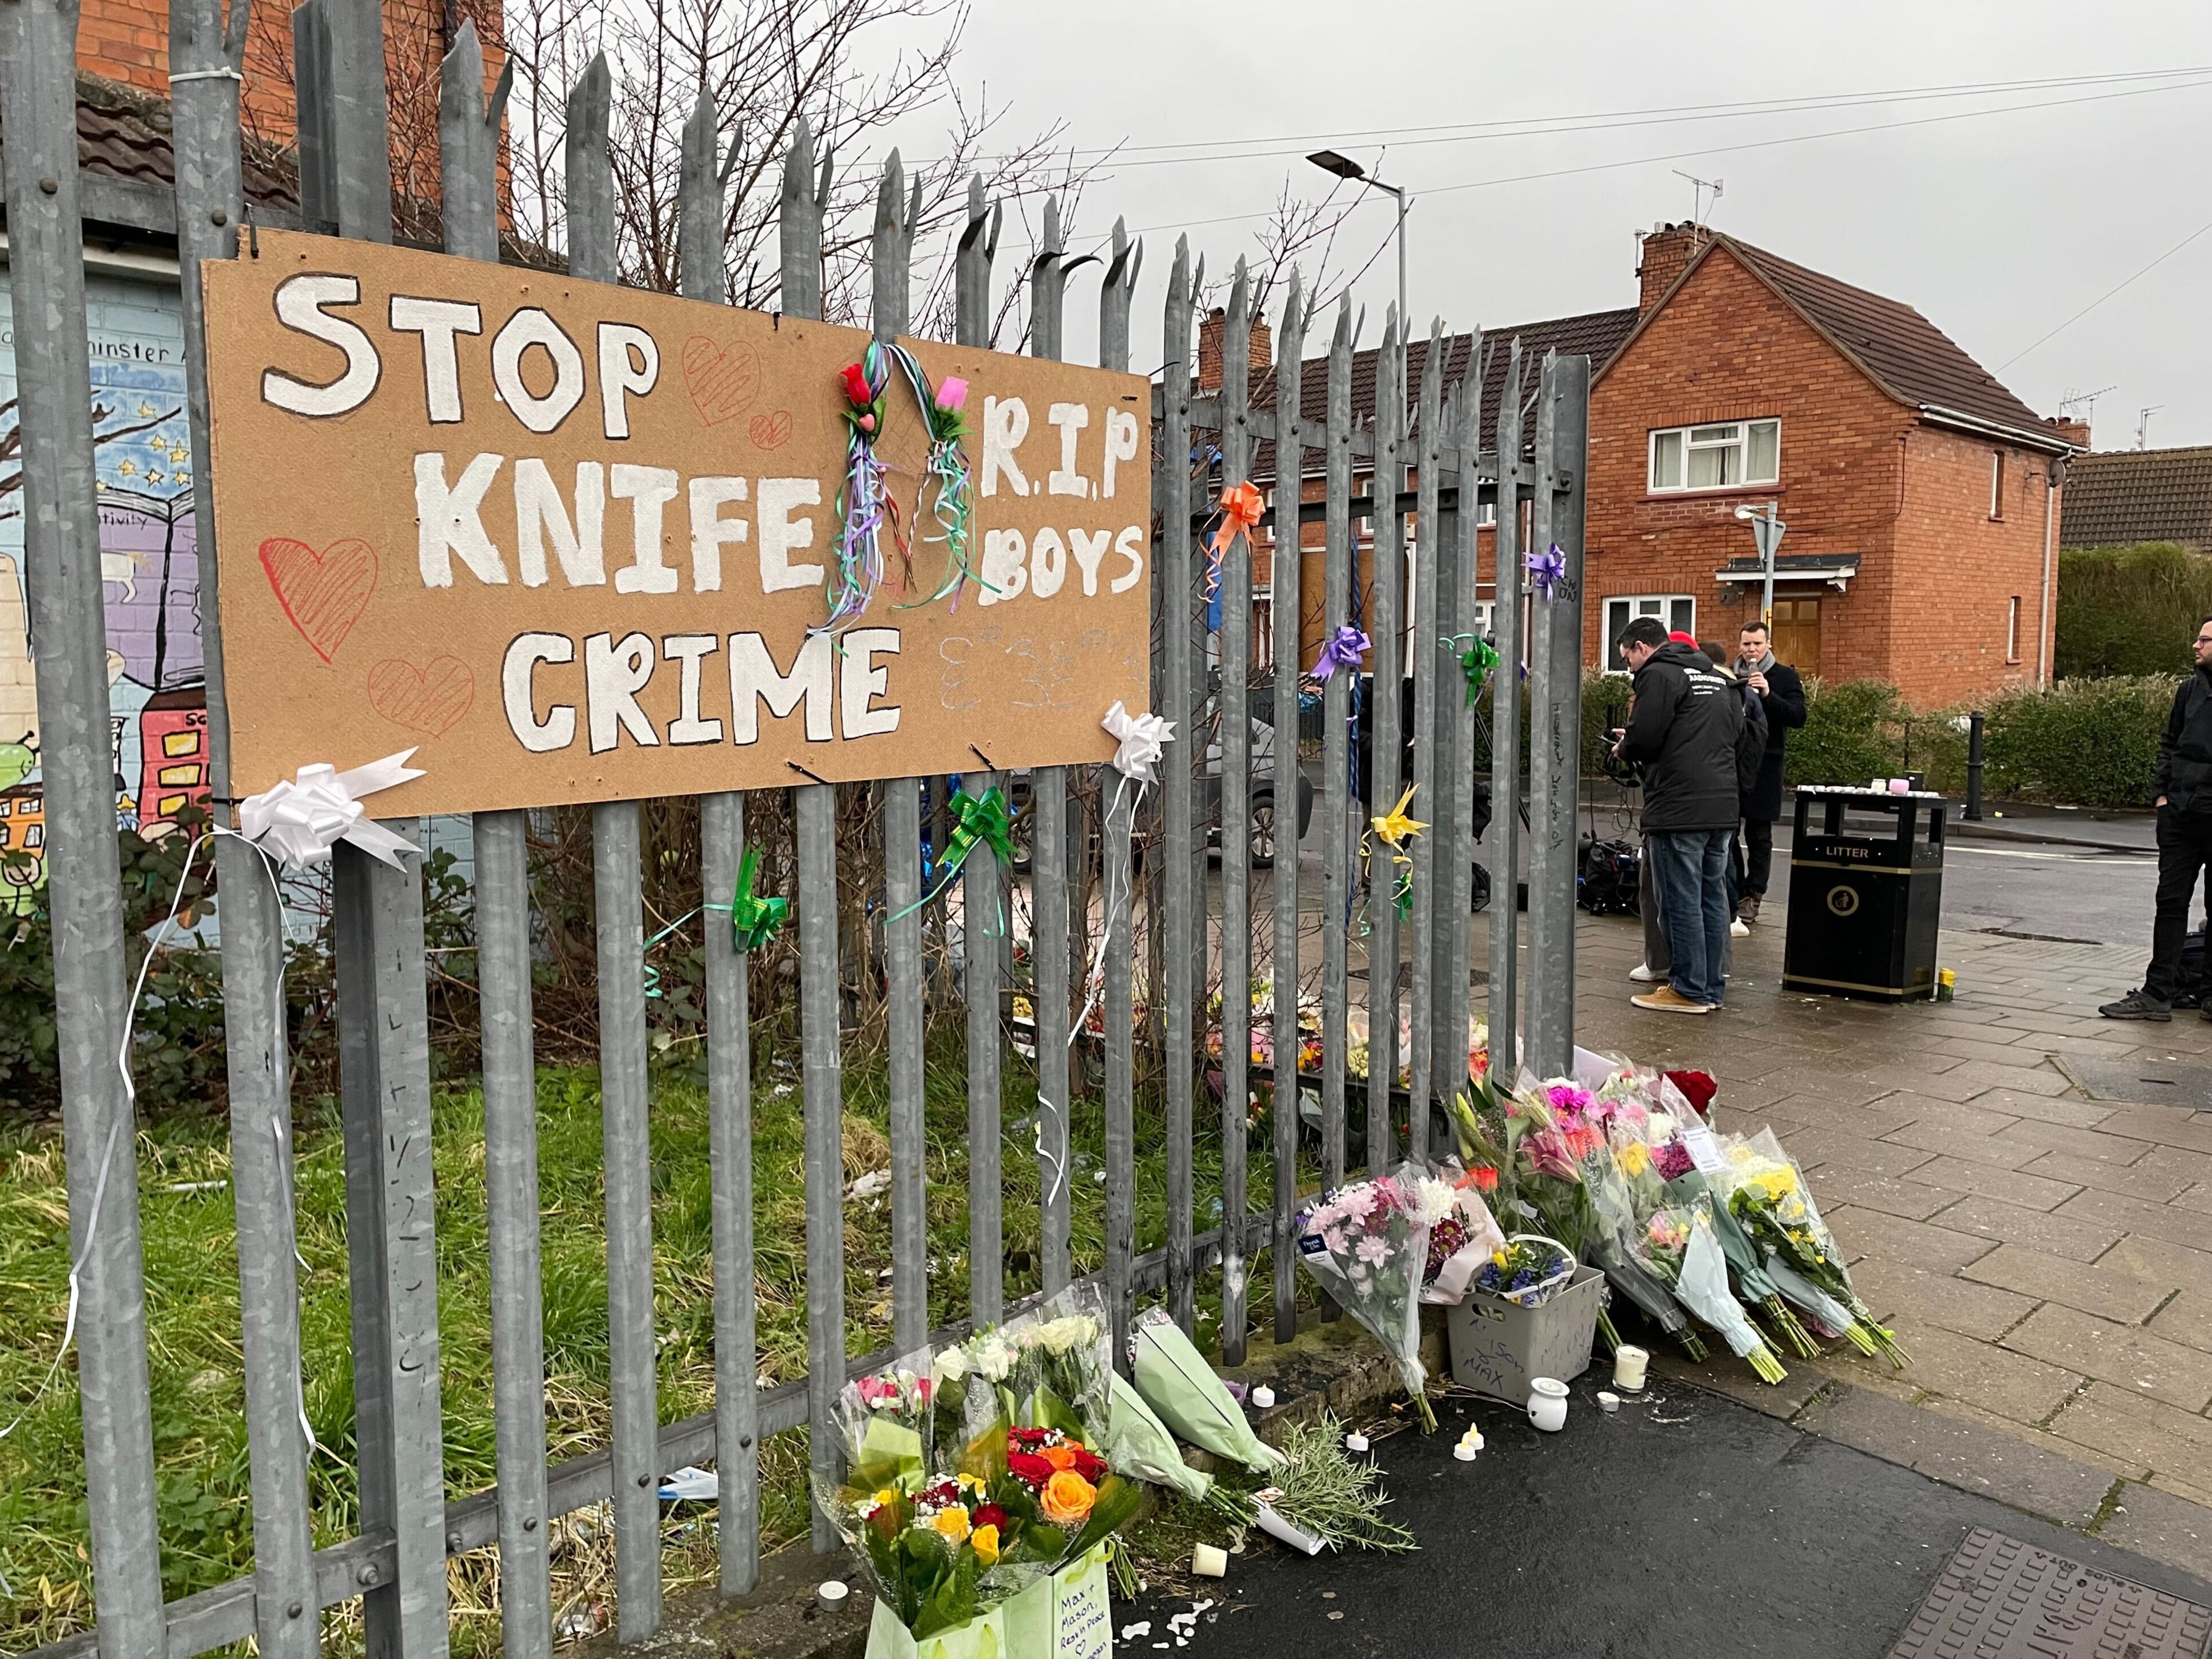 The double tragedy has renewed calls for more to be done to tackle knife crime